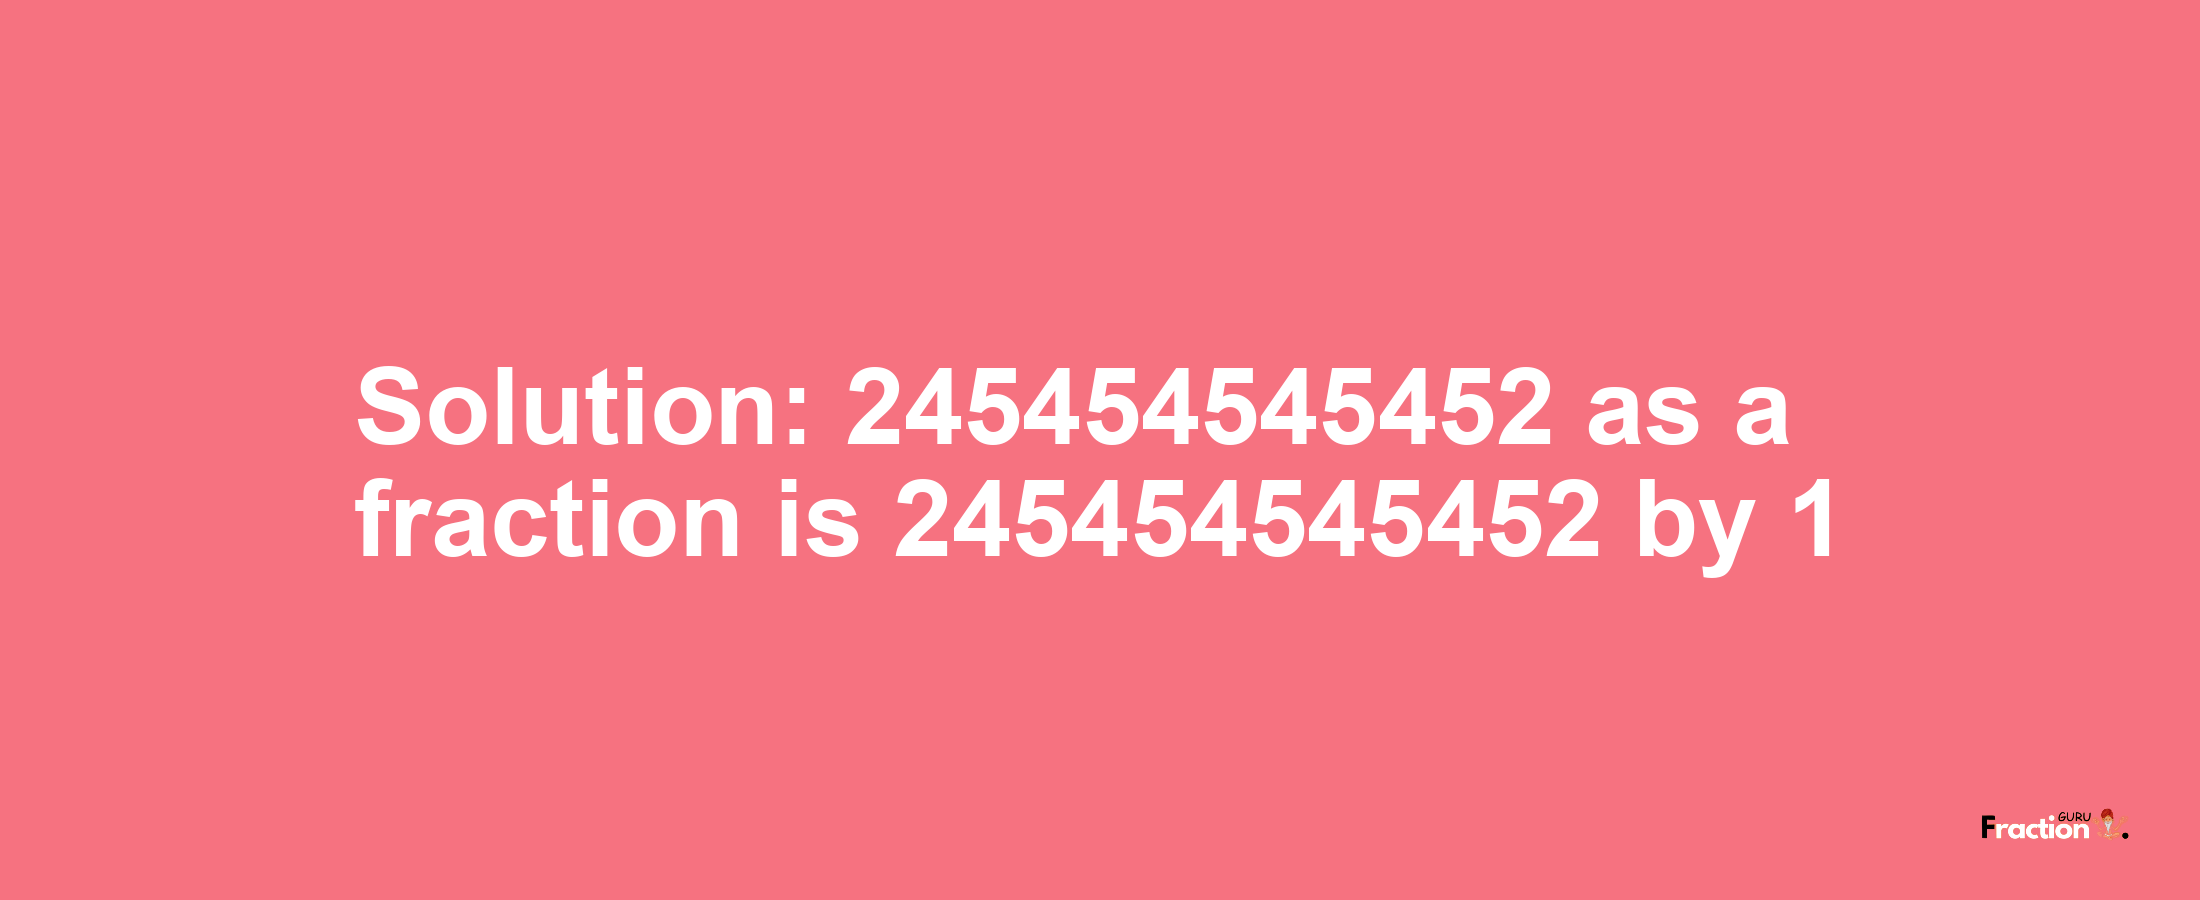 Solution:245454545452 as a fraction is 245454545452/1